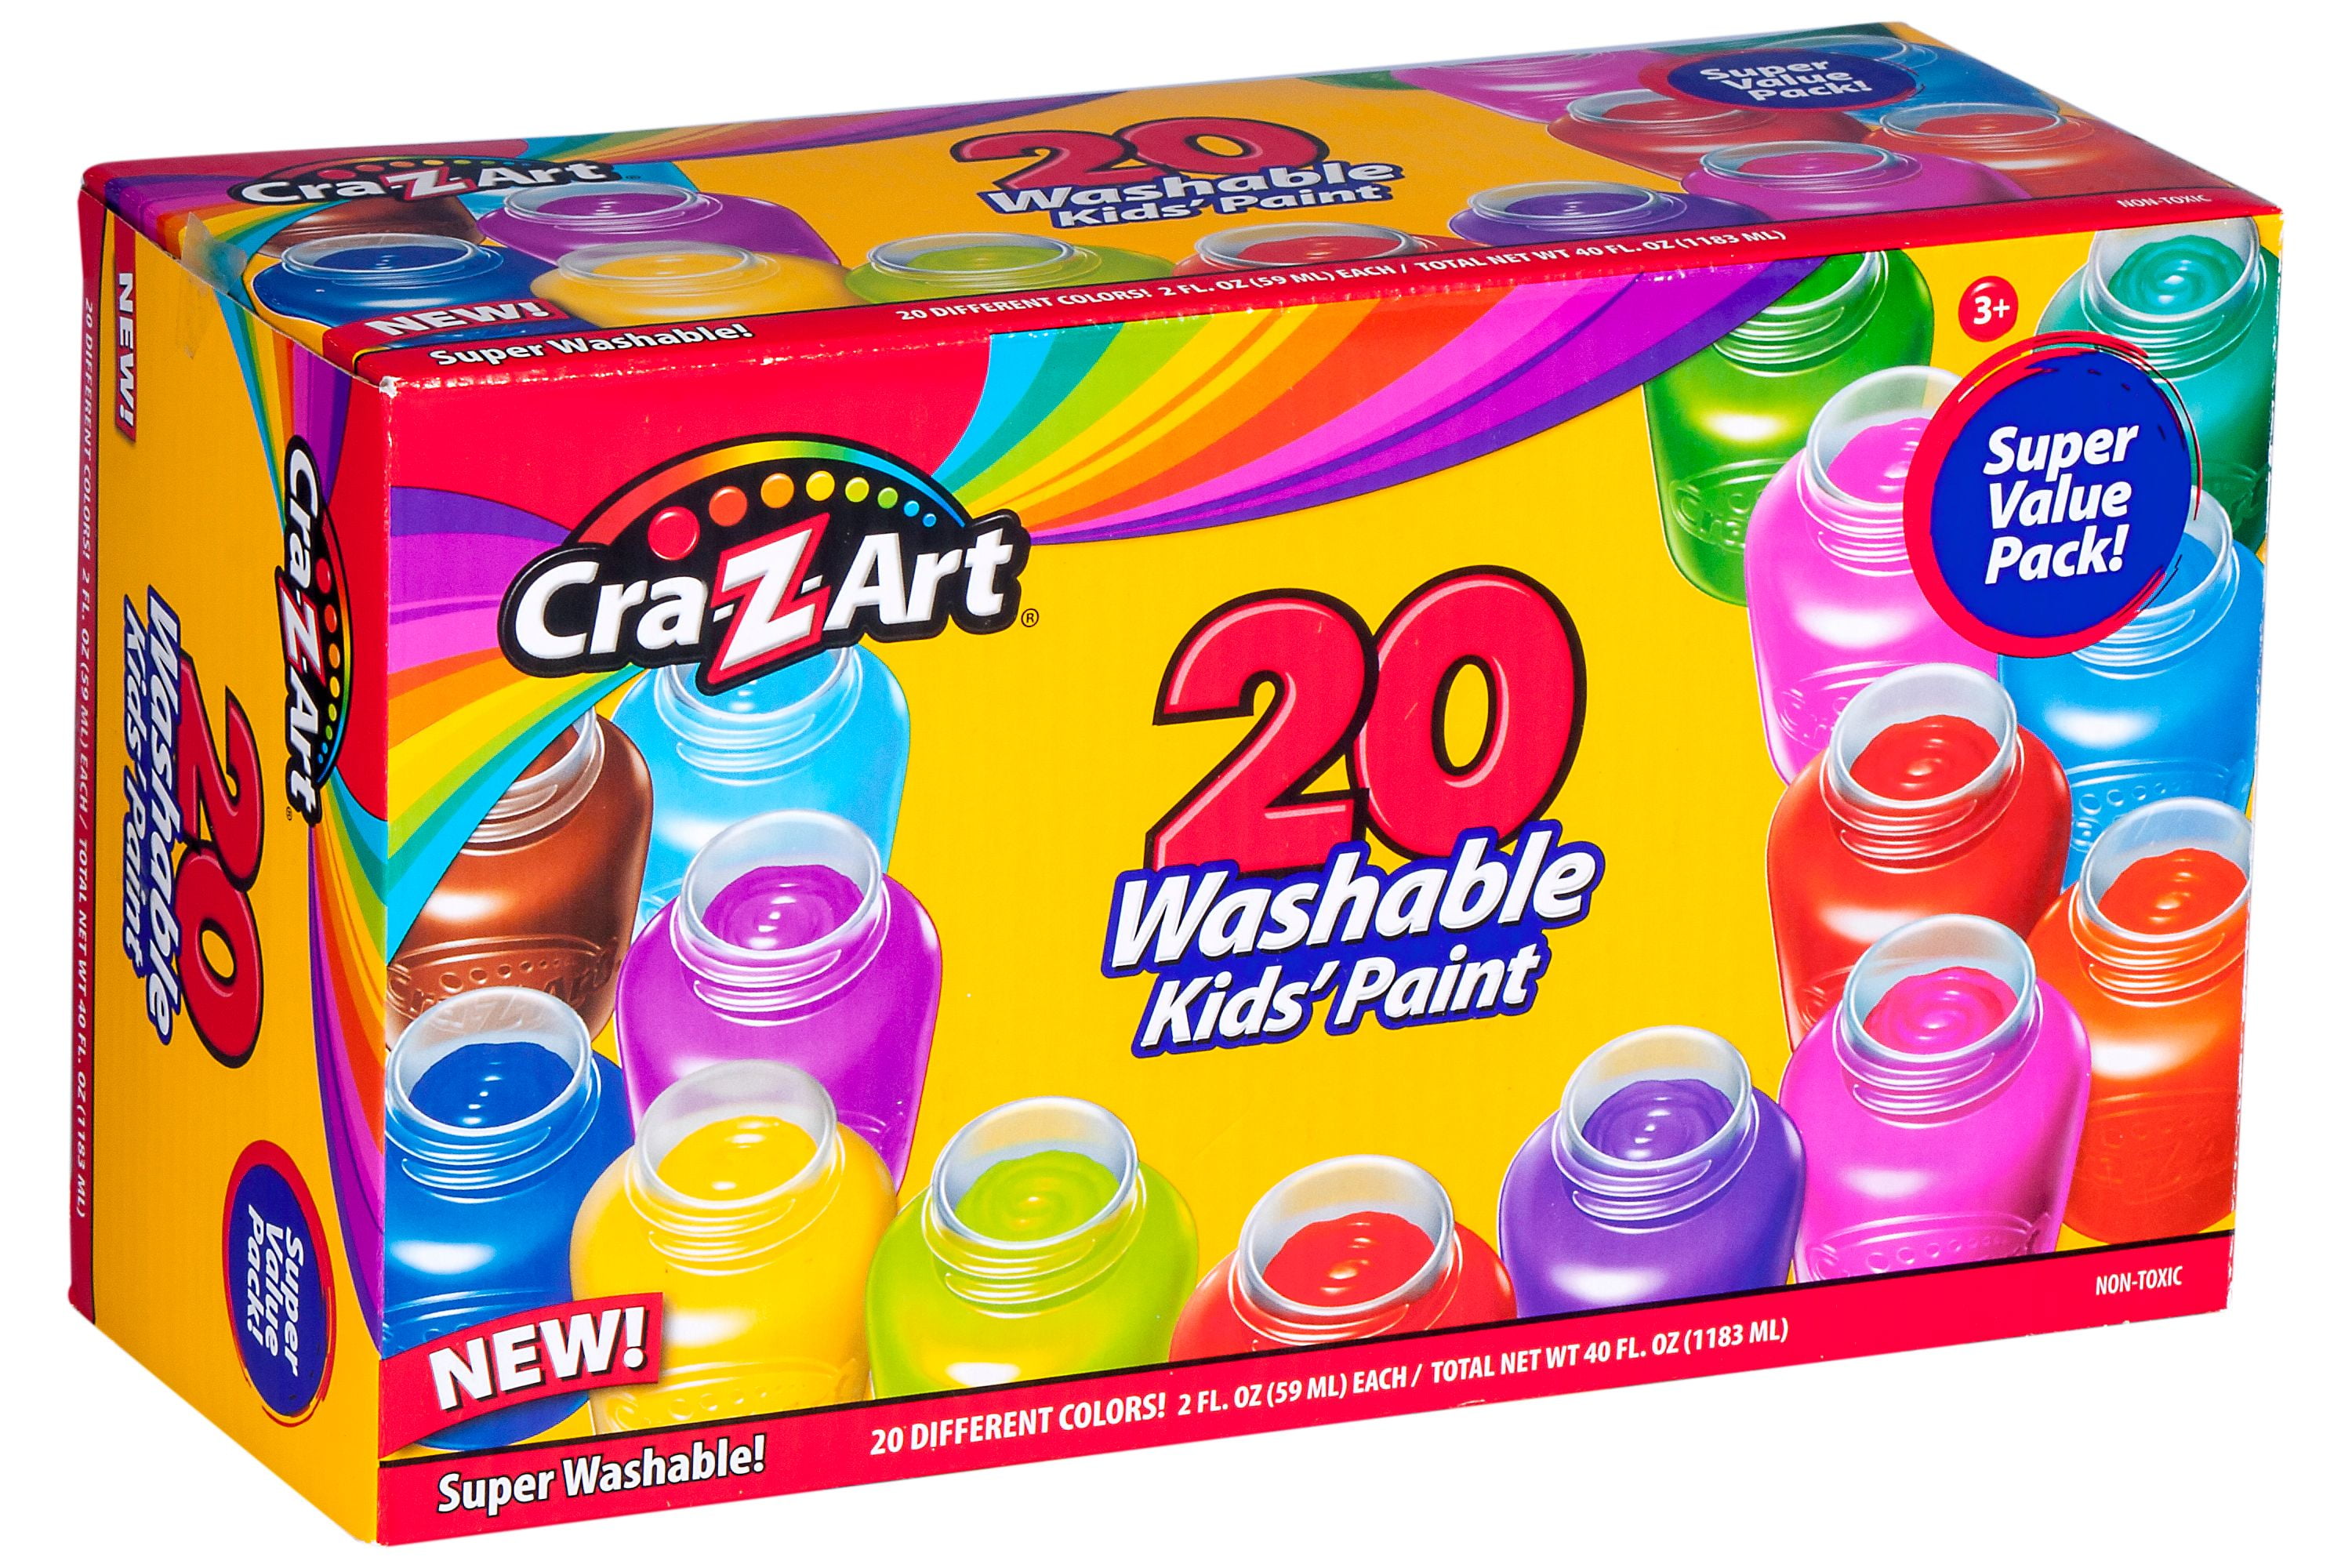 ColorCrayz Paint Set for Kids - 27 Piece Art Kit for Girls & Boys Ages 4-10  - Non-Toxic Washable Painting Supplies with Canvases, Brushes Easel Smock